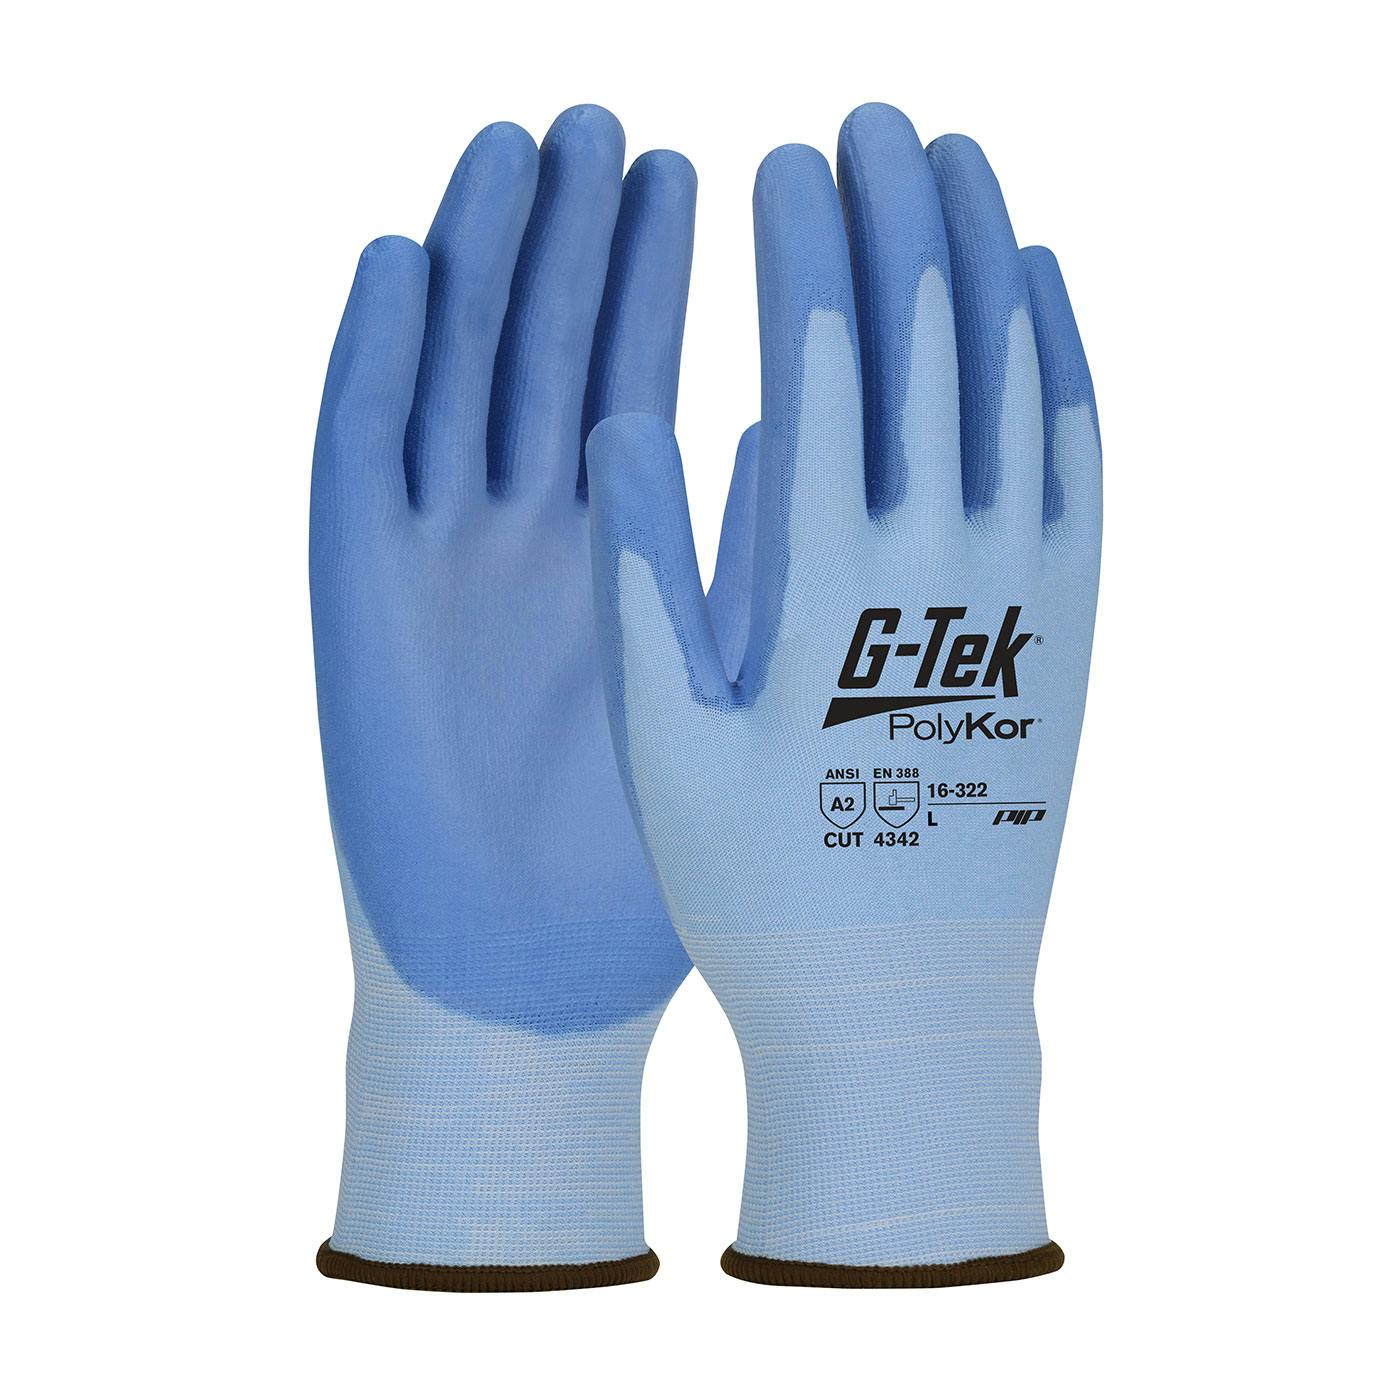 G-Tek® PolyKor® Seamless Knit PolyKor® Blended Glove with Polyurethane Coated Flat Grip on Palm & Fingers (16-322)_0